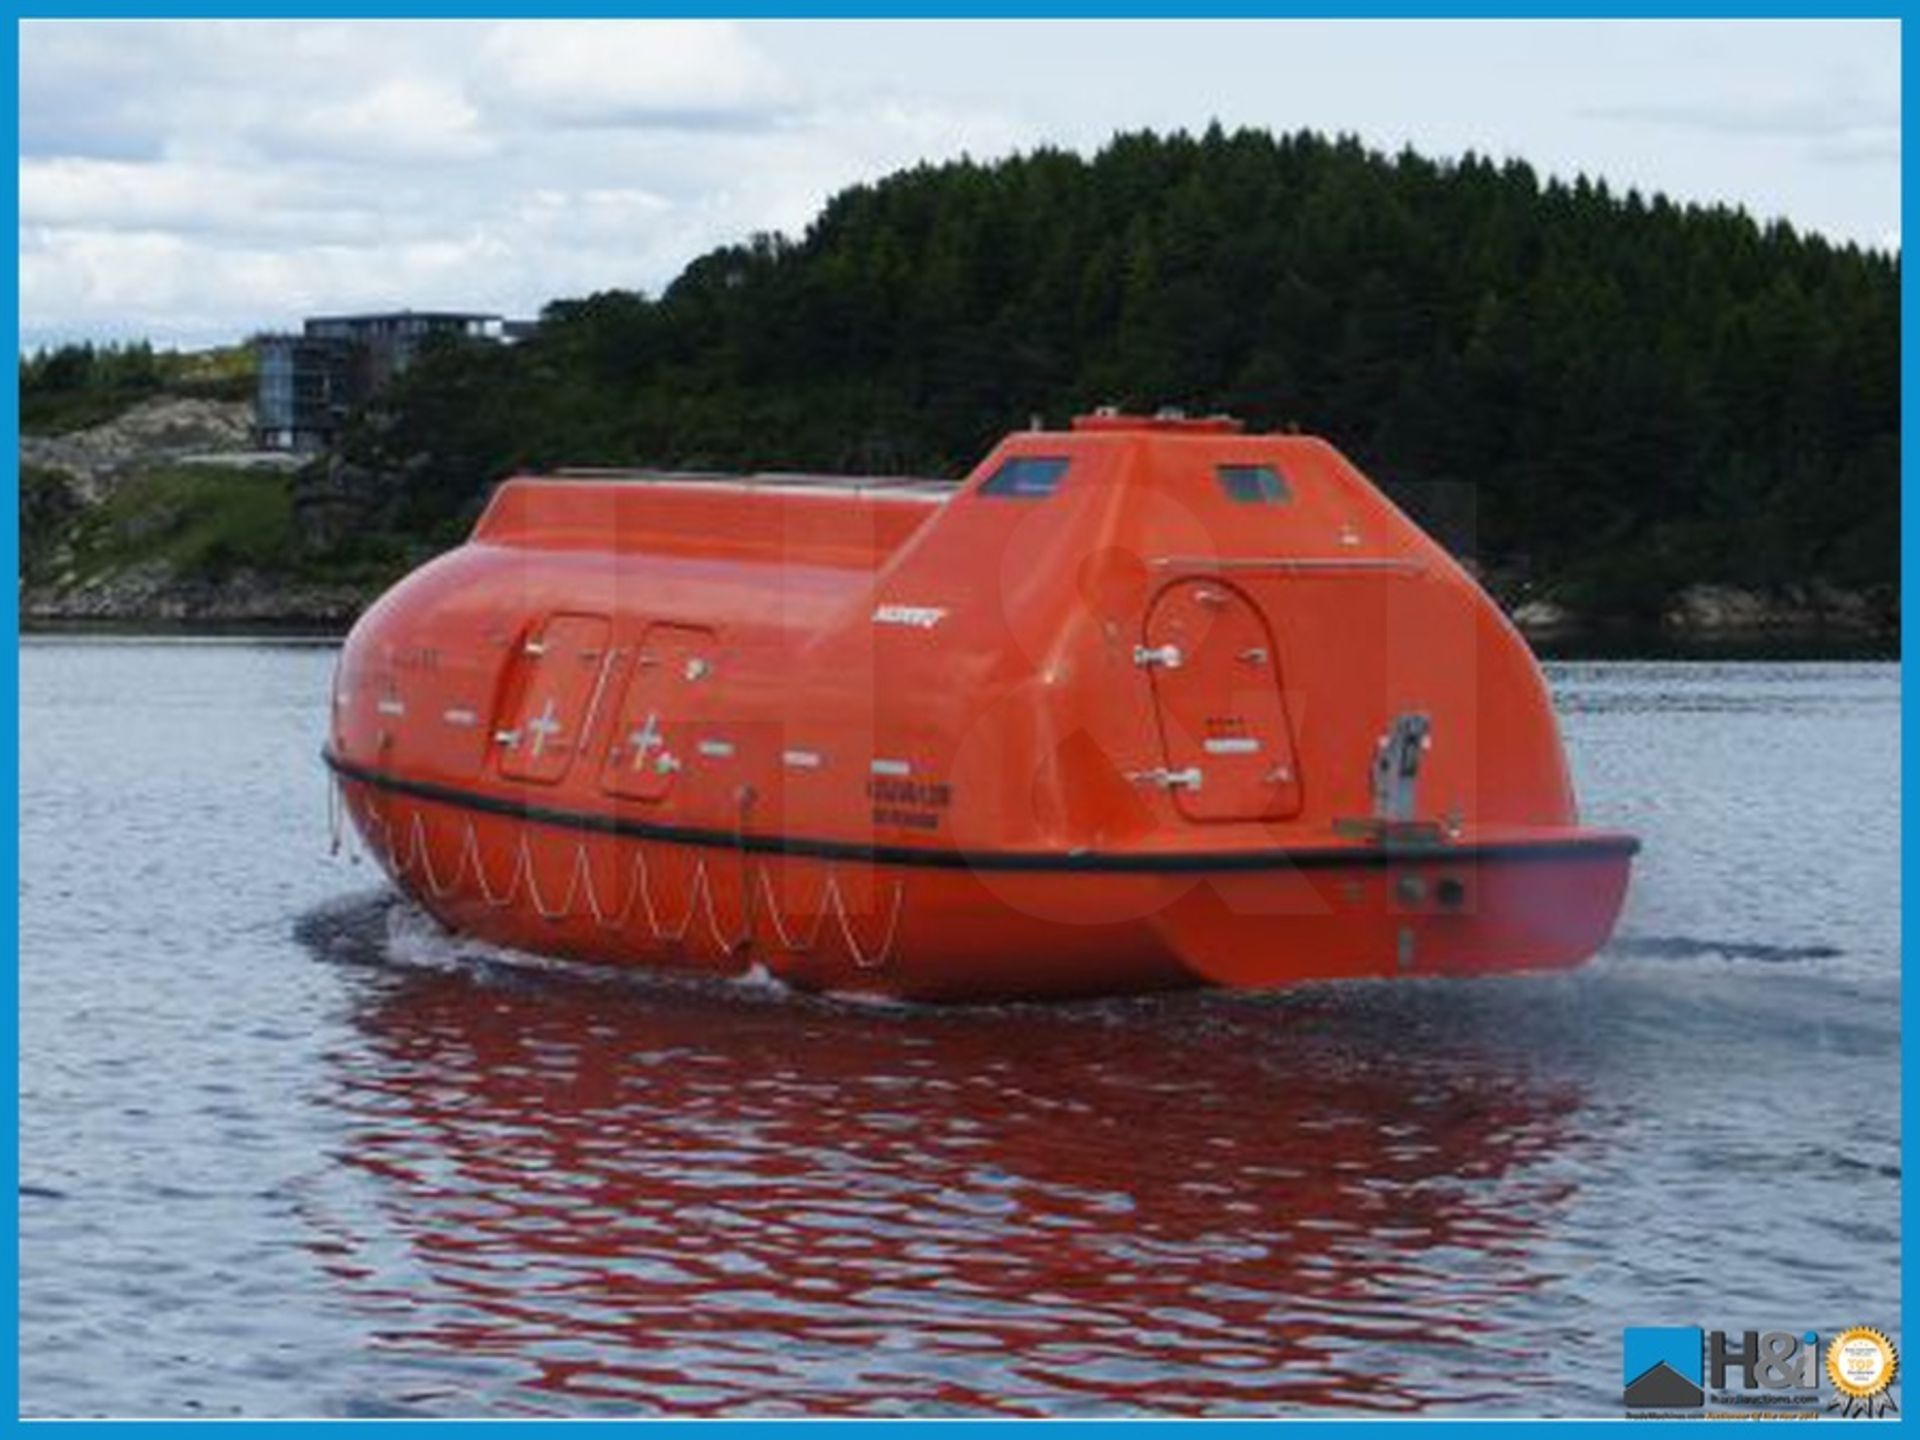 Noreq LBT935T totally enclosed lifeboat built approximately 2010 for same marine project as the - Image 2 of 38